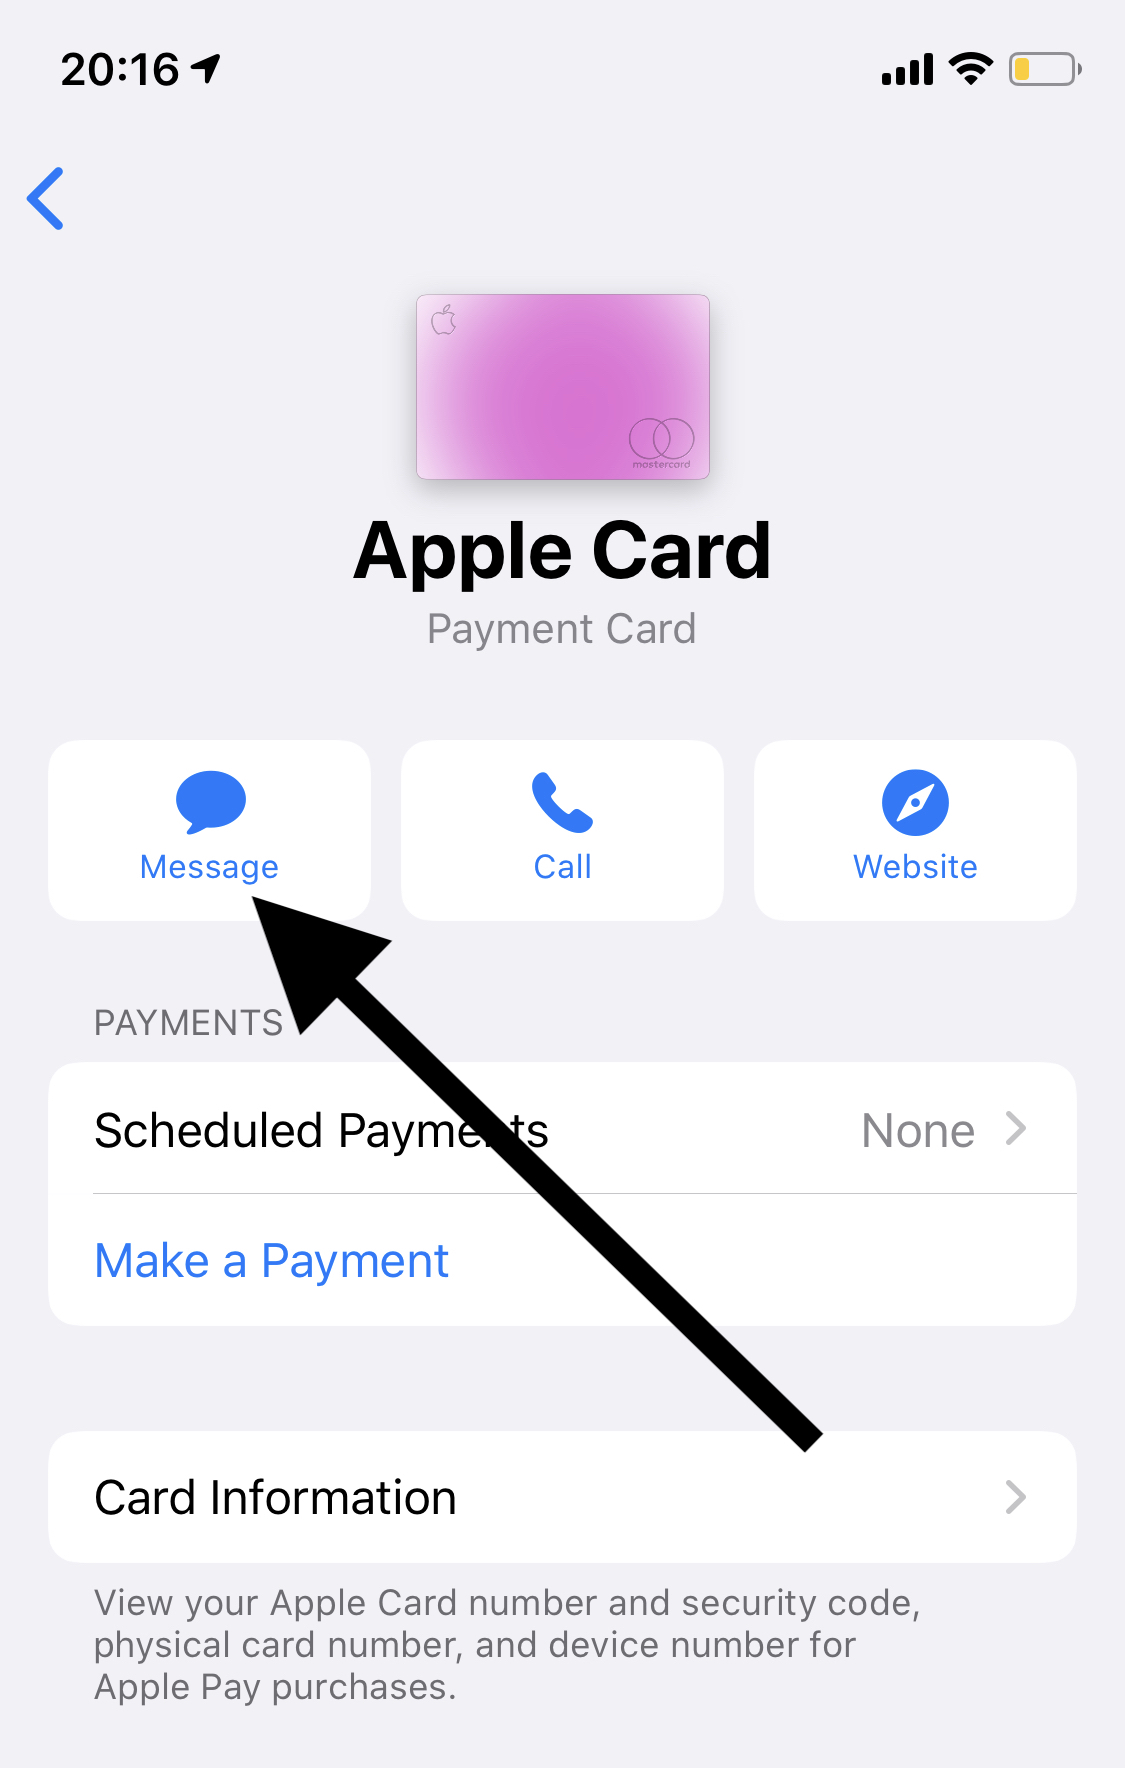 How To Increase Your Apple Card Credit Limit - macReports